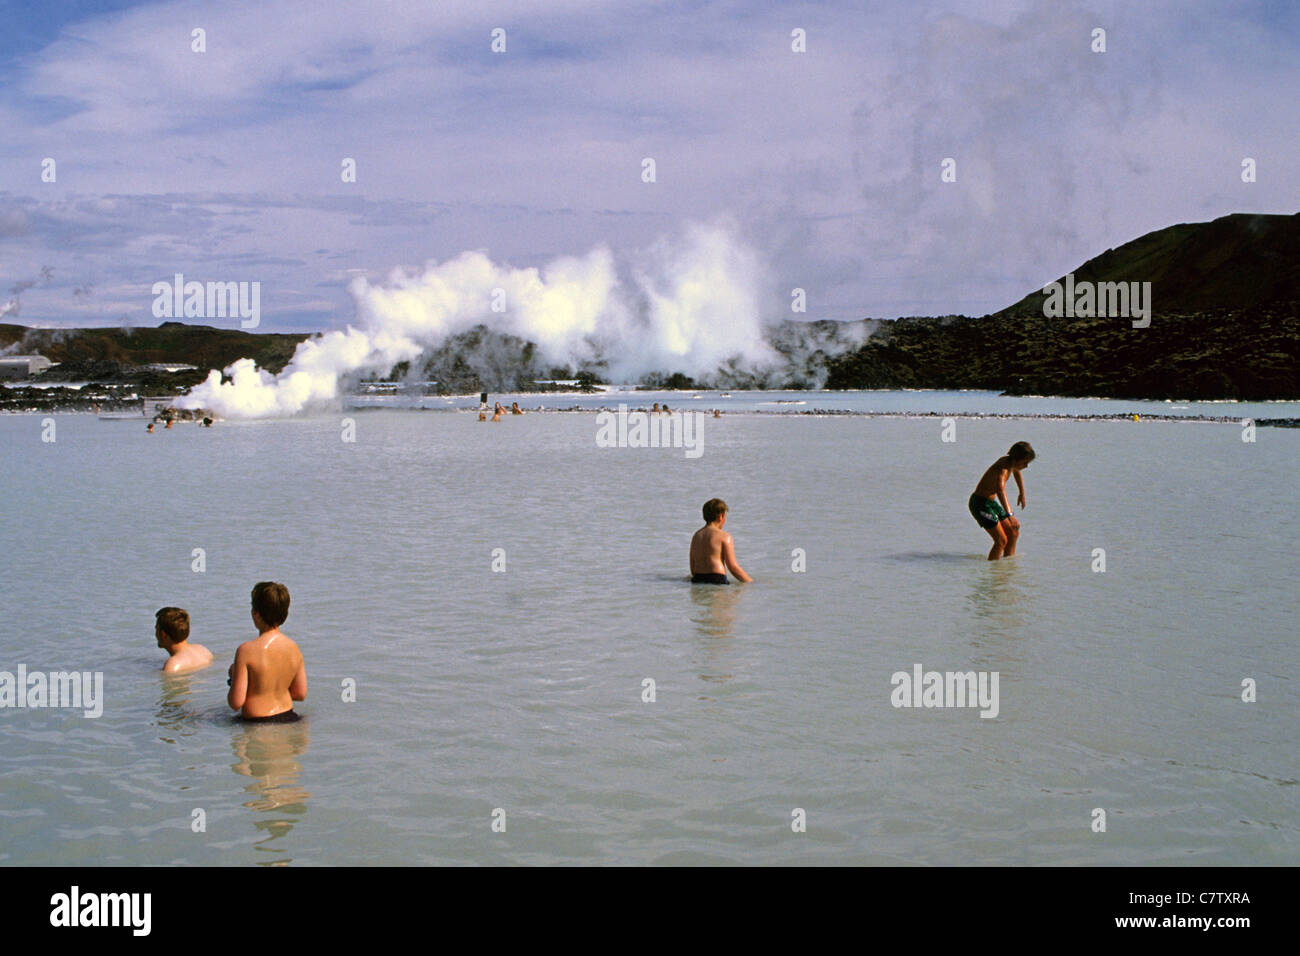 People in a thermal pool - Blue Lagoon, Reykjavik, Iceland Stock Photo